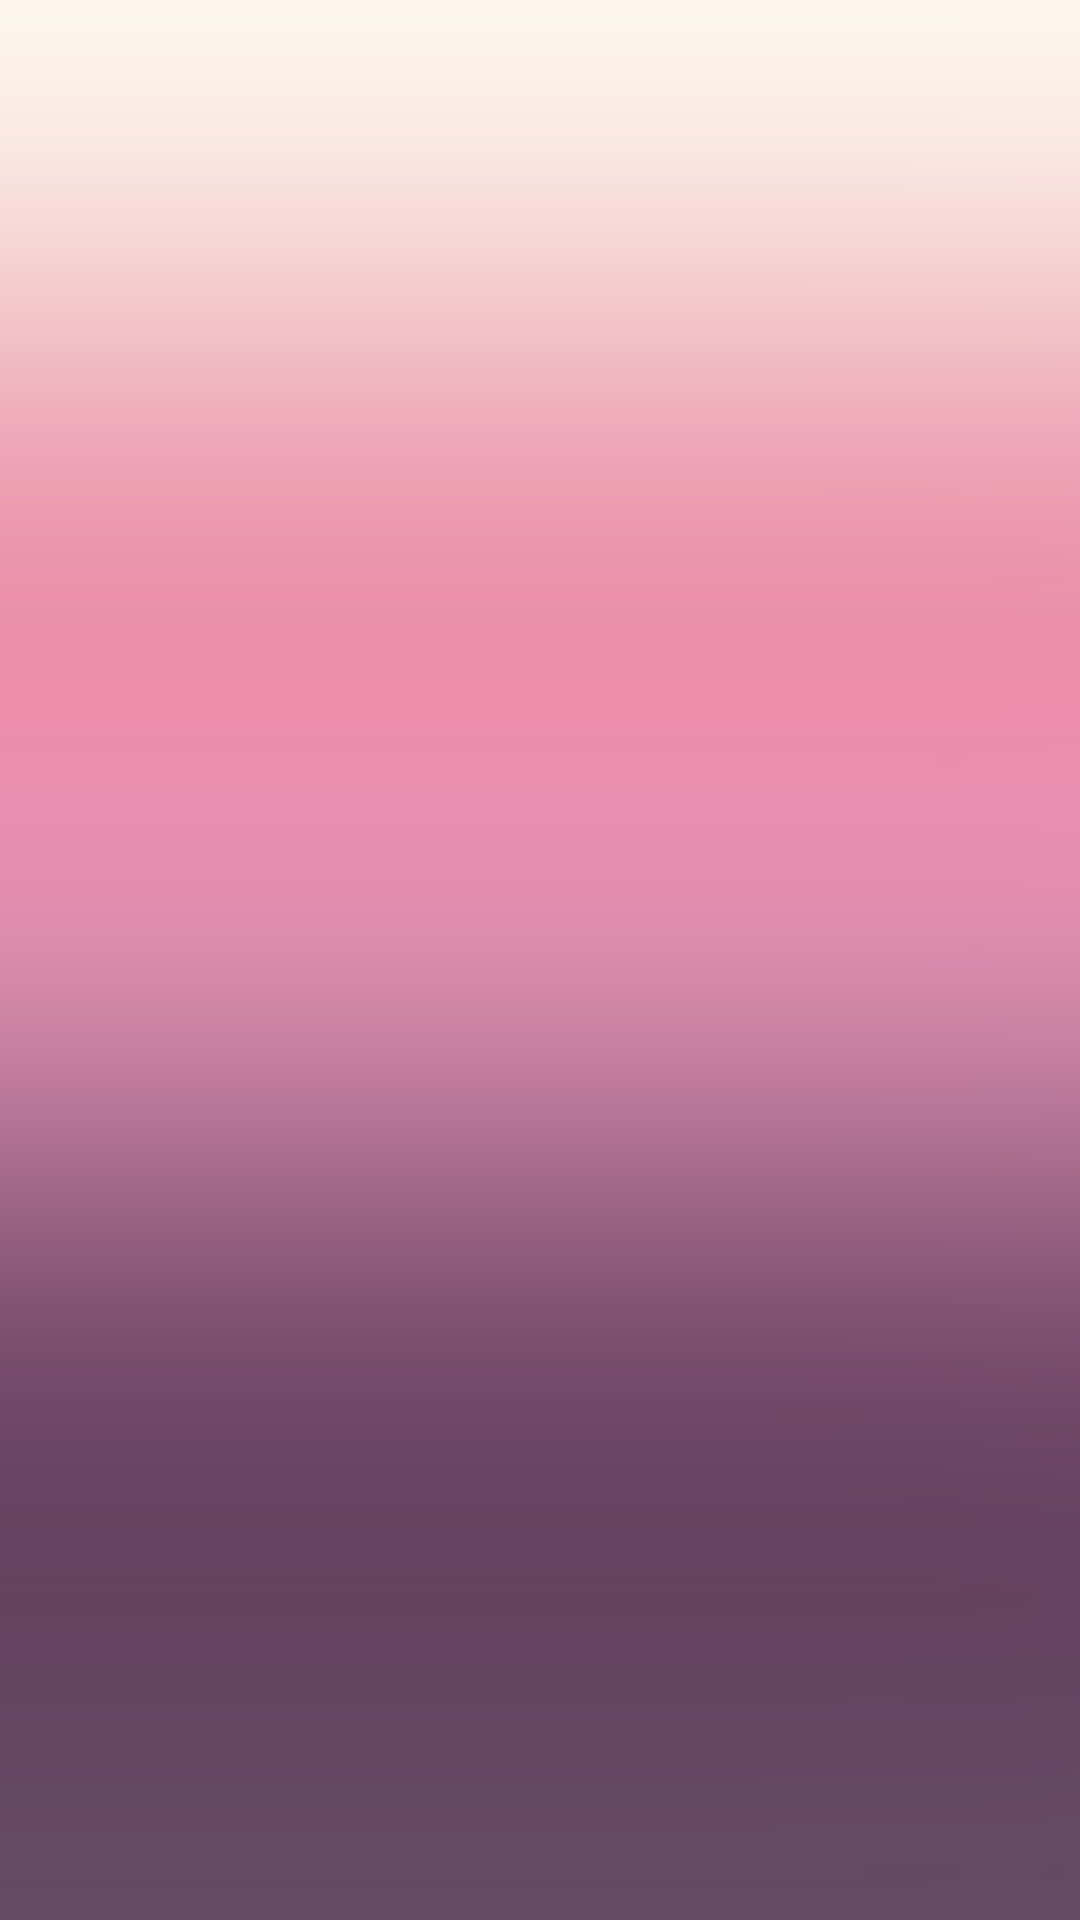 Layered shades of white, purple and pink for a perfect gradient Wallpaper